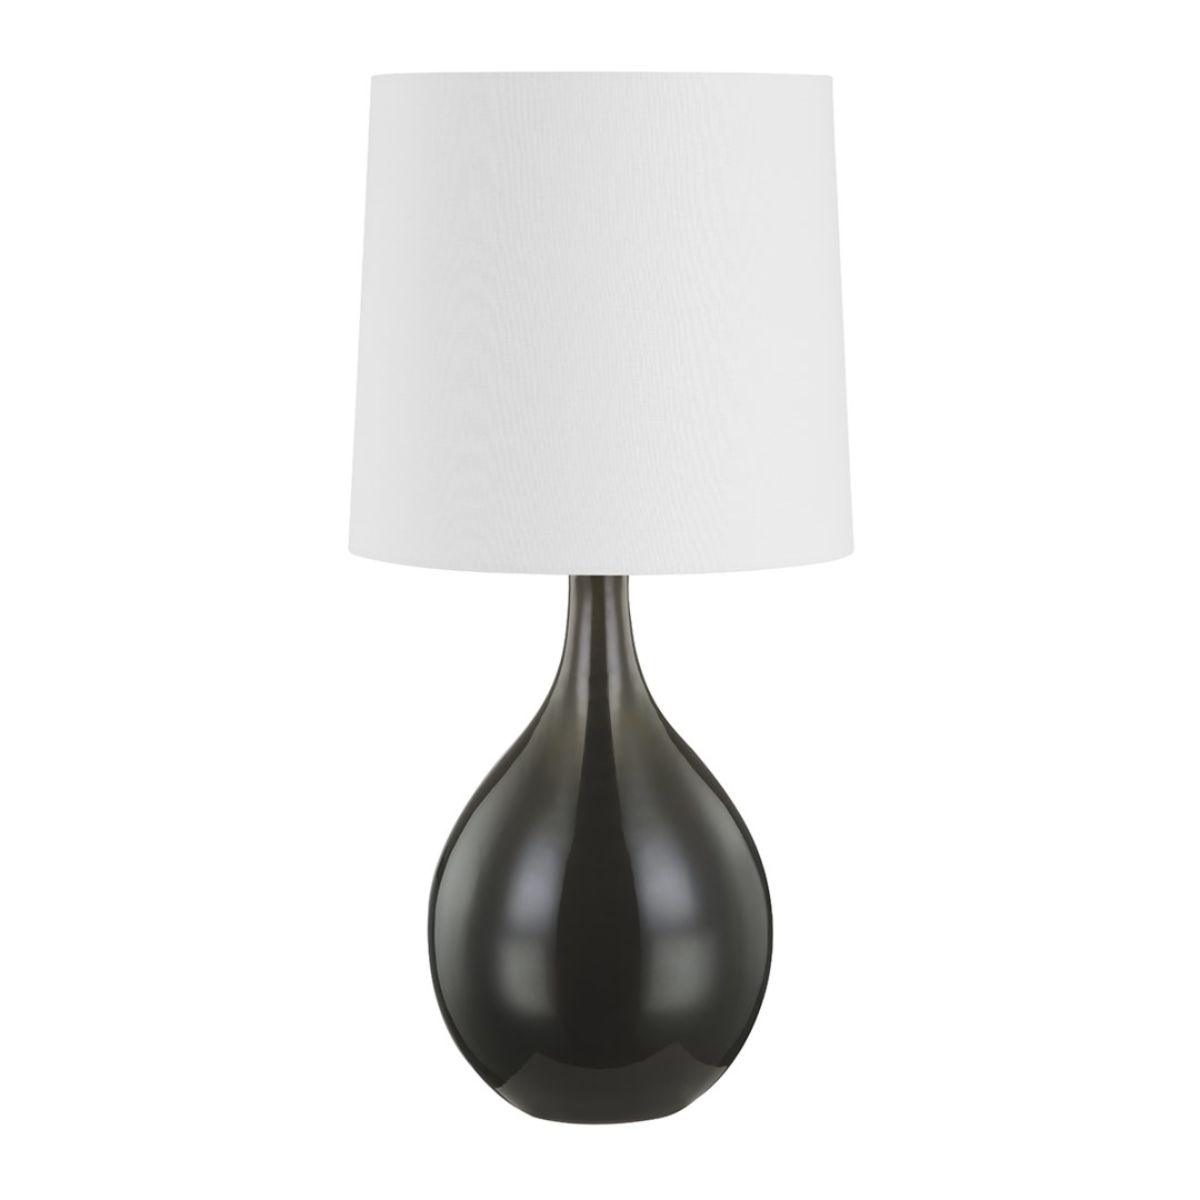 Durban Table Lamp Ceramic Gloss Mink with Aged Brass Accents